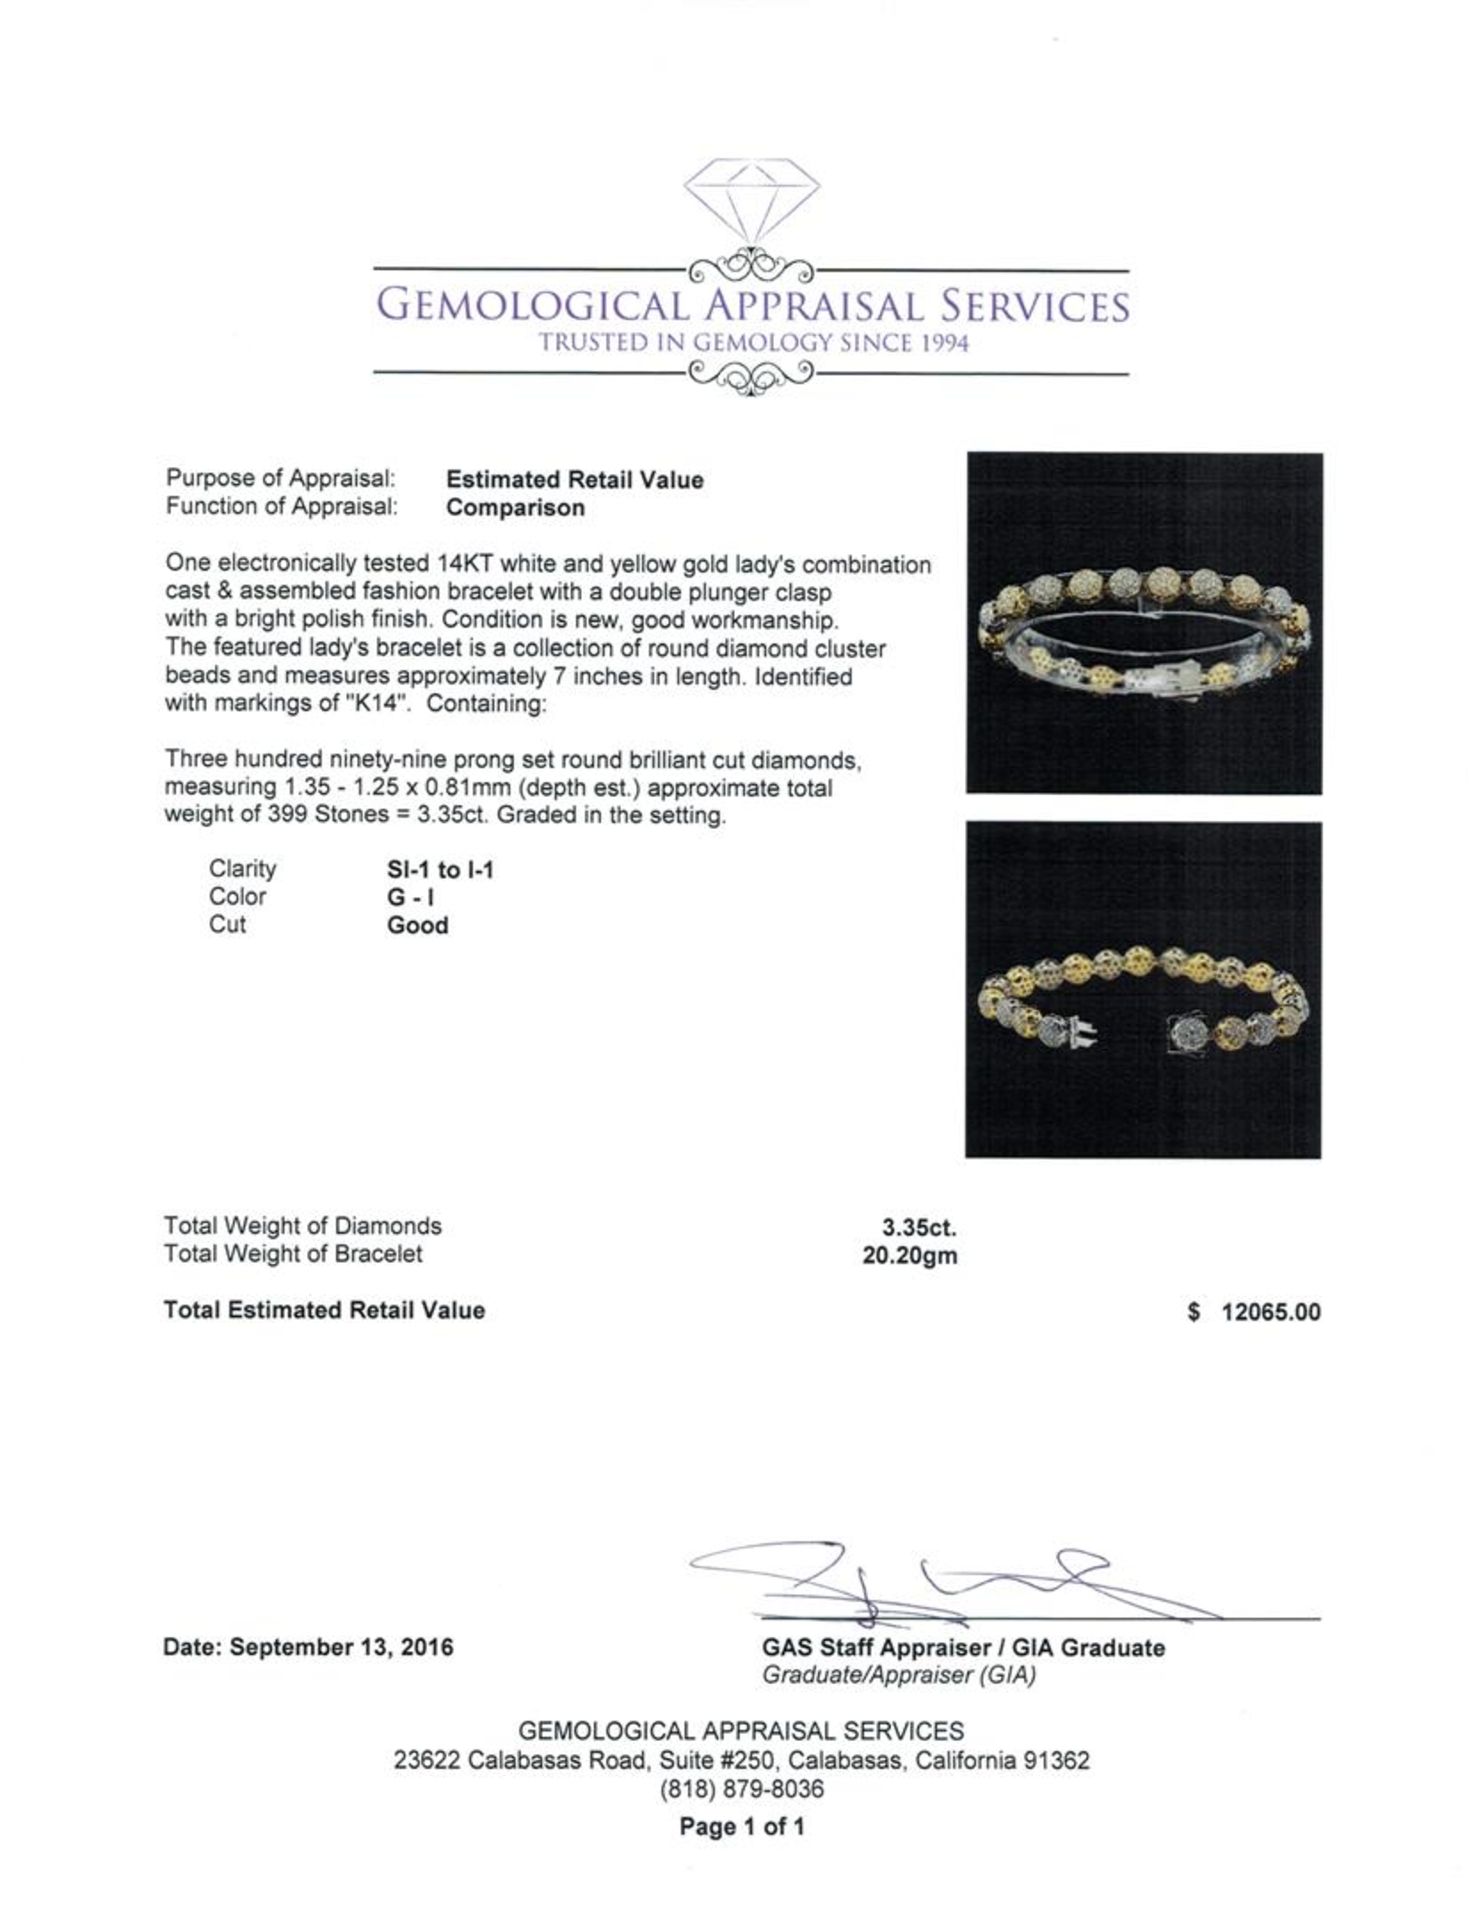 3.35 ctw Diamond Bracelet - 14KT White and Yellow Gold - Image 4 of 4